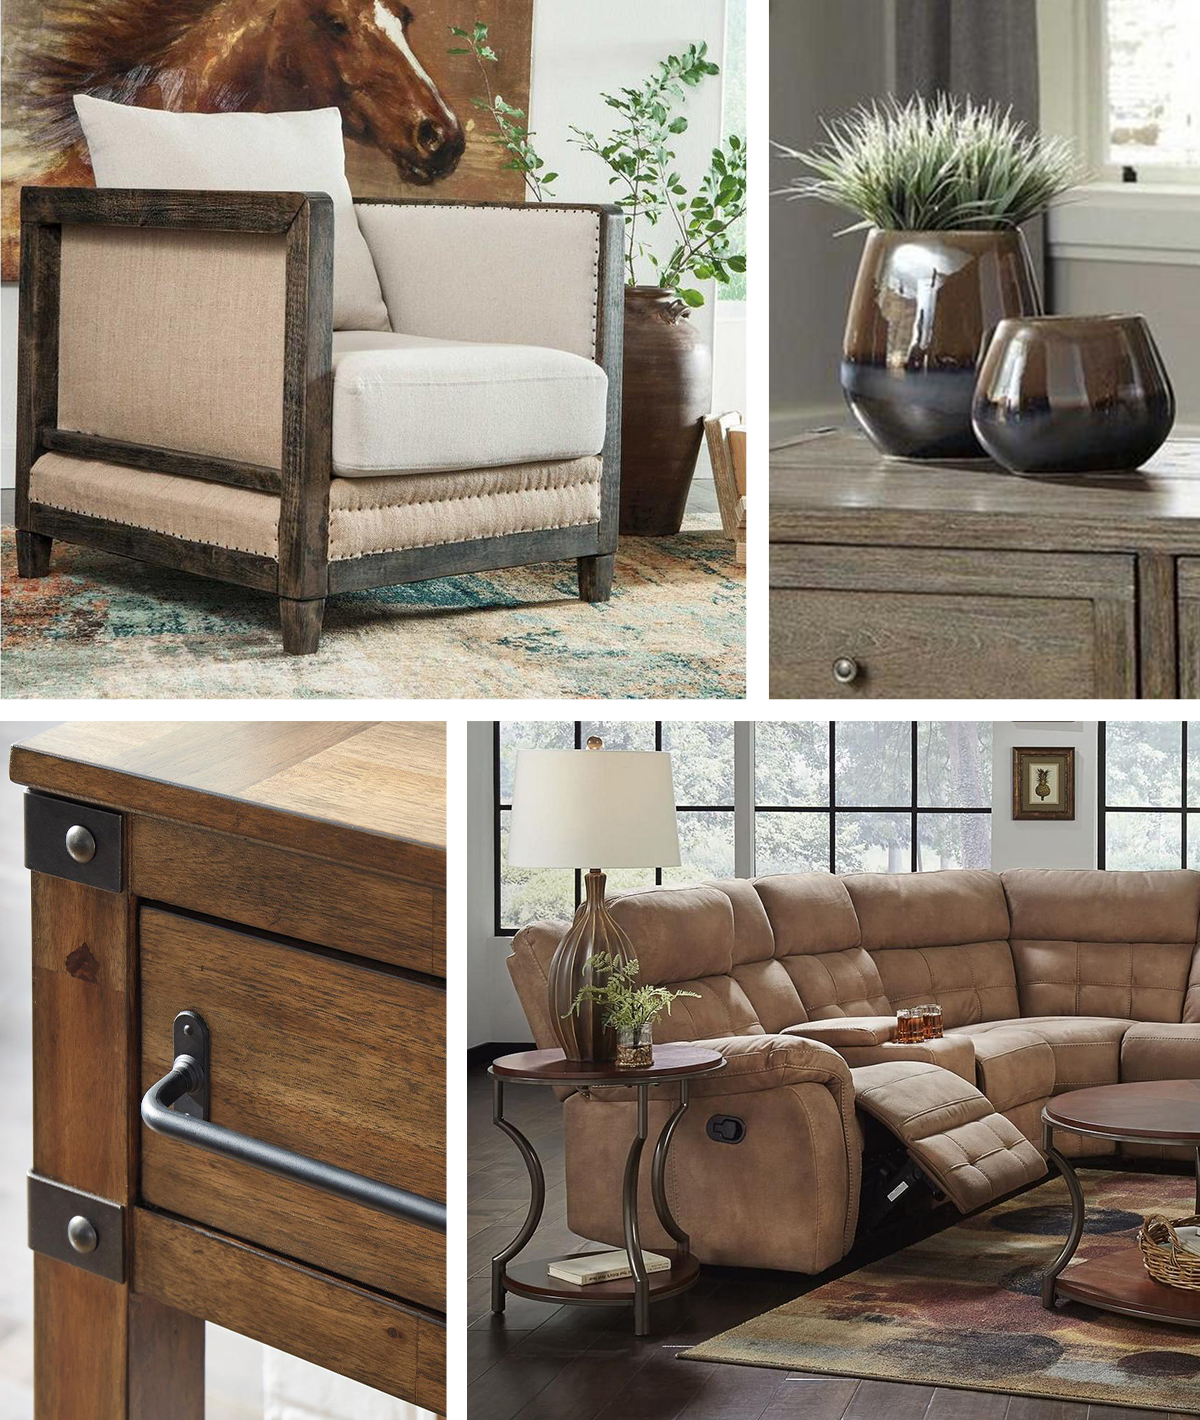 mood board of rustic style rooms and furniture